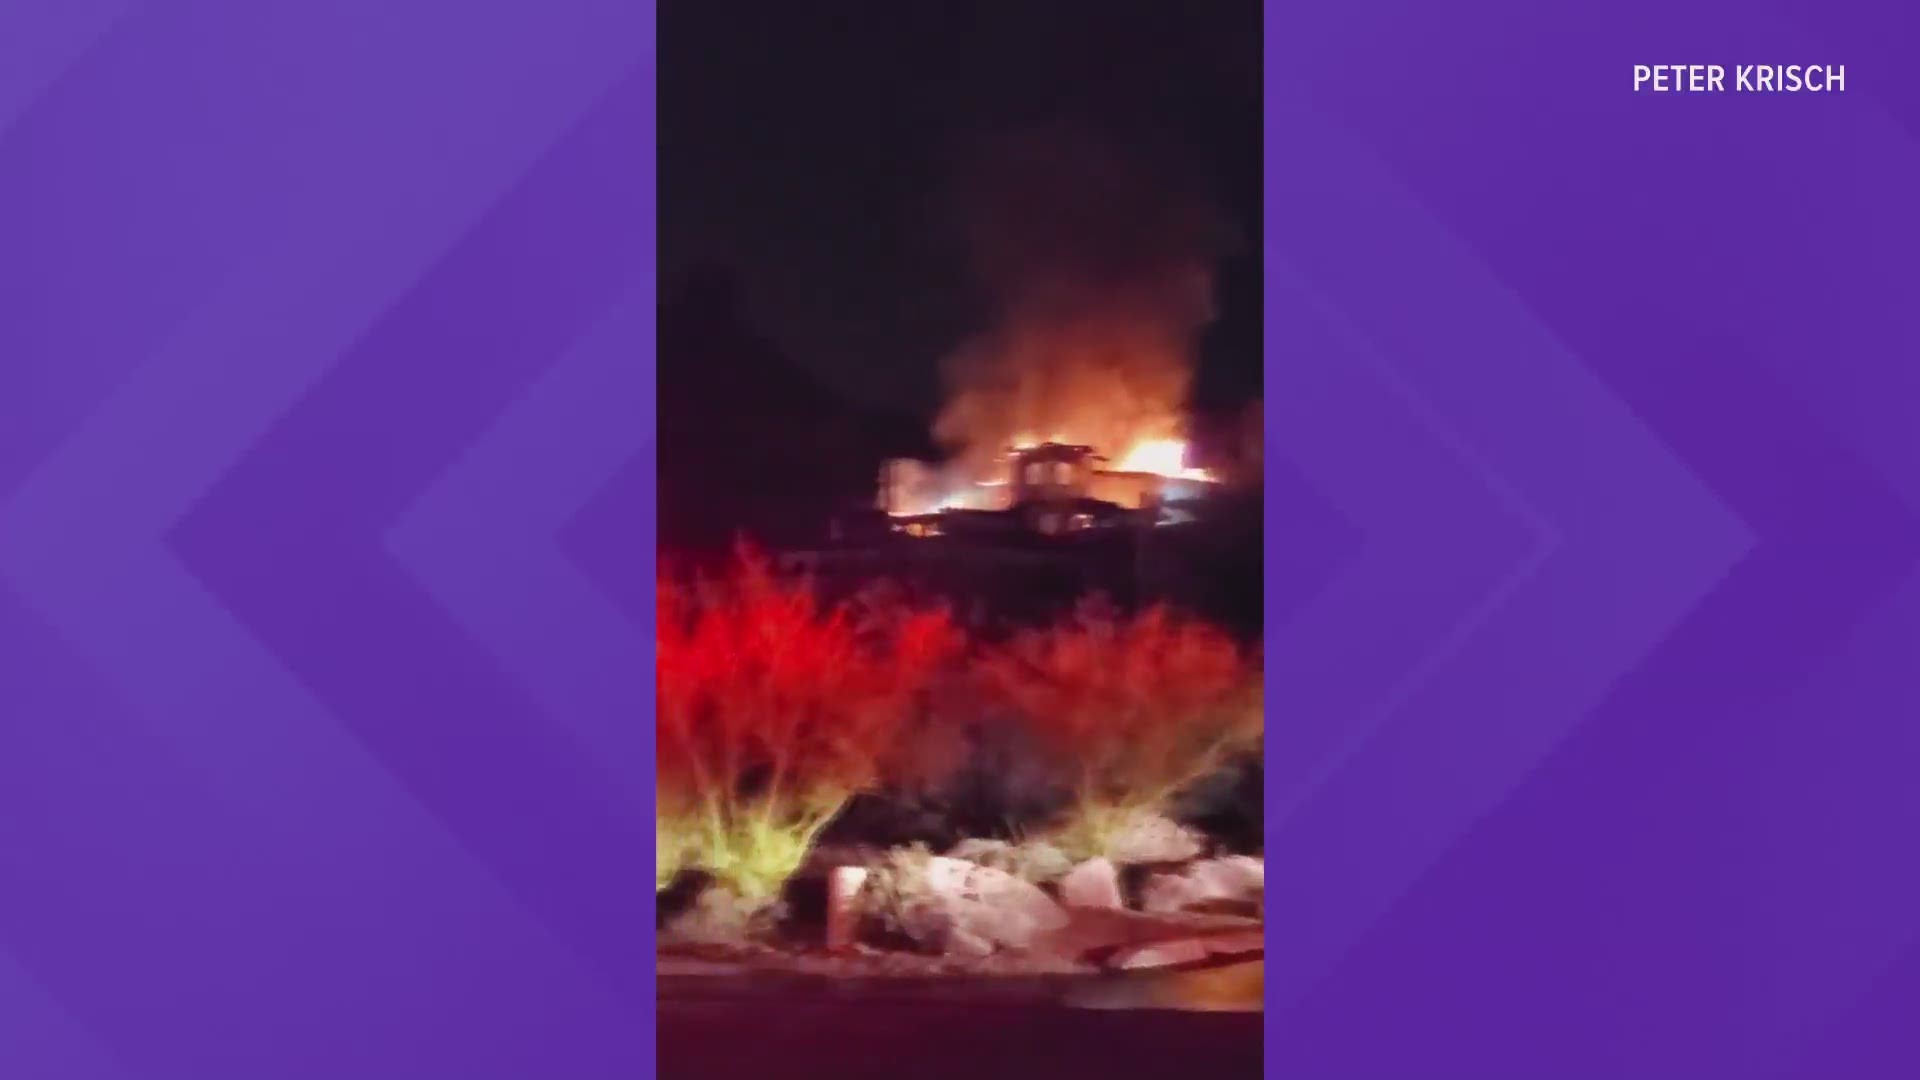 Peter Krisch captured video of a fire consuming the "Wedding Cake" house in Carefree, Arizona on Feb. 2. Officials said no one was home at the time of the fire.